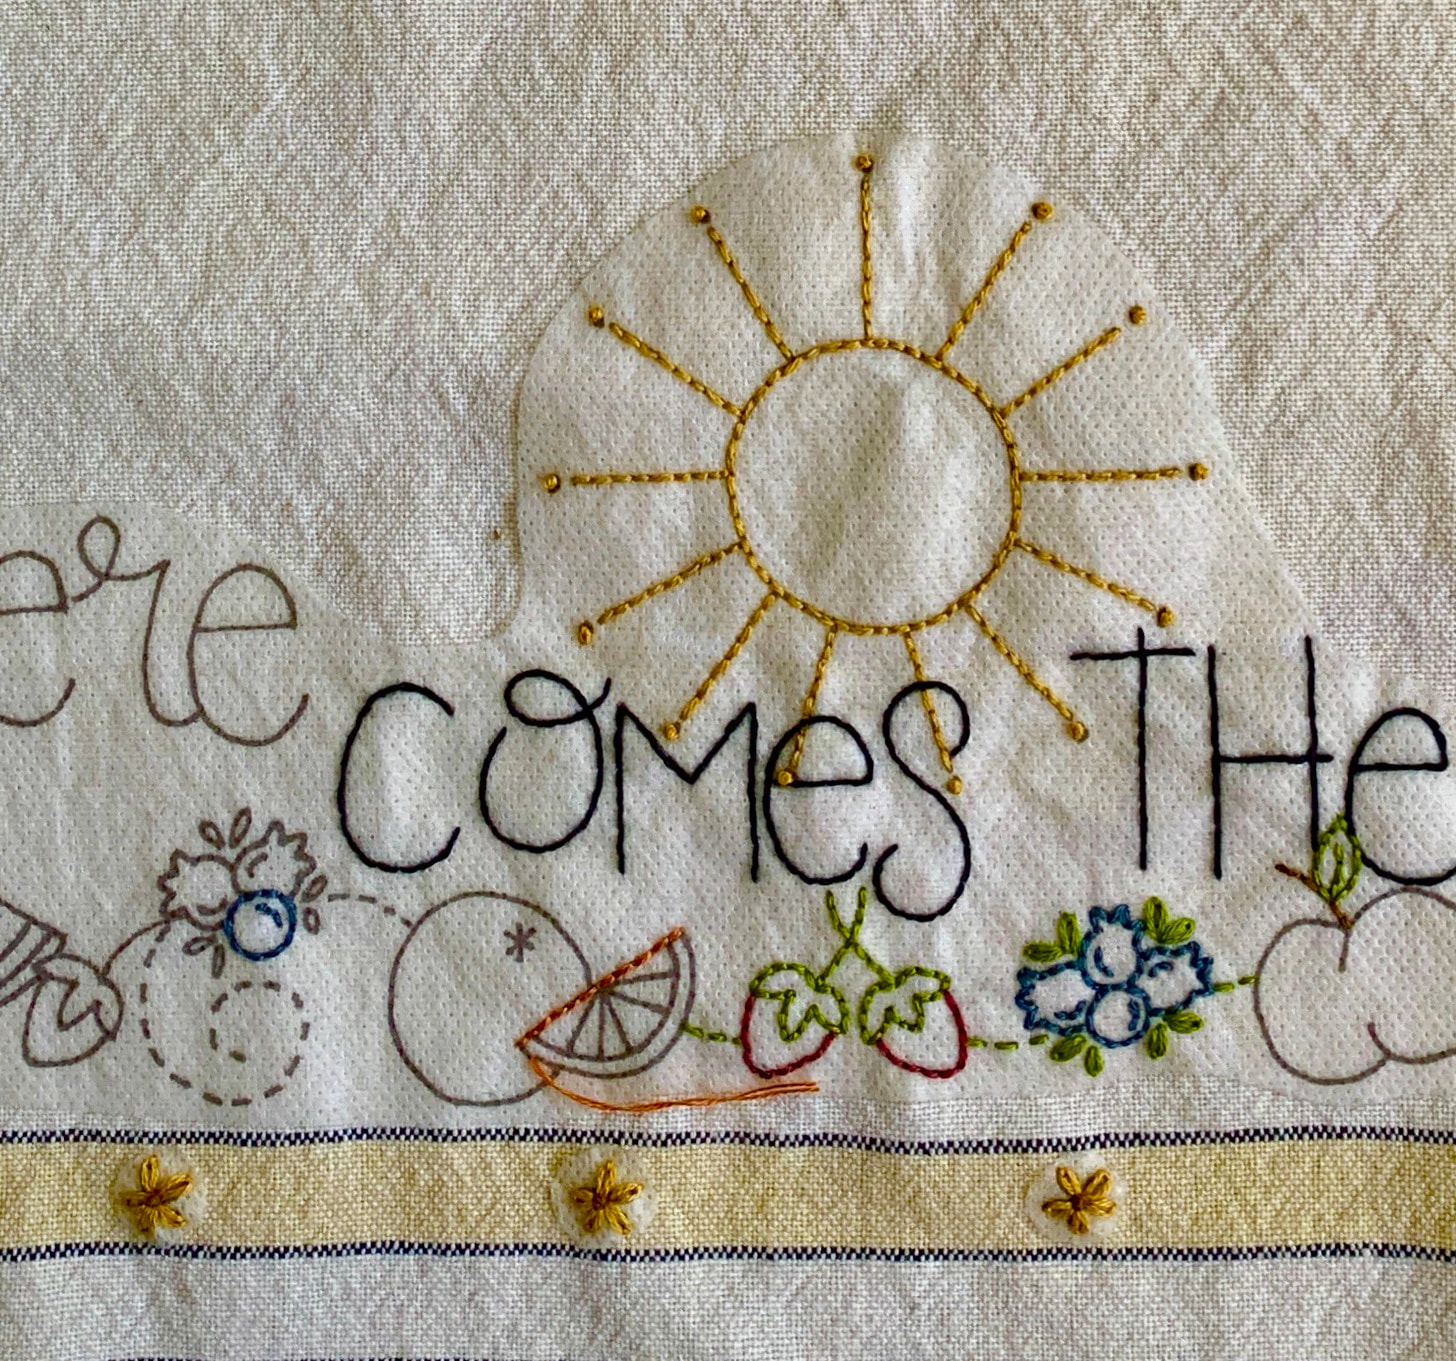 Stitching on Paper - Paper Embroidery Tutorials